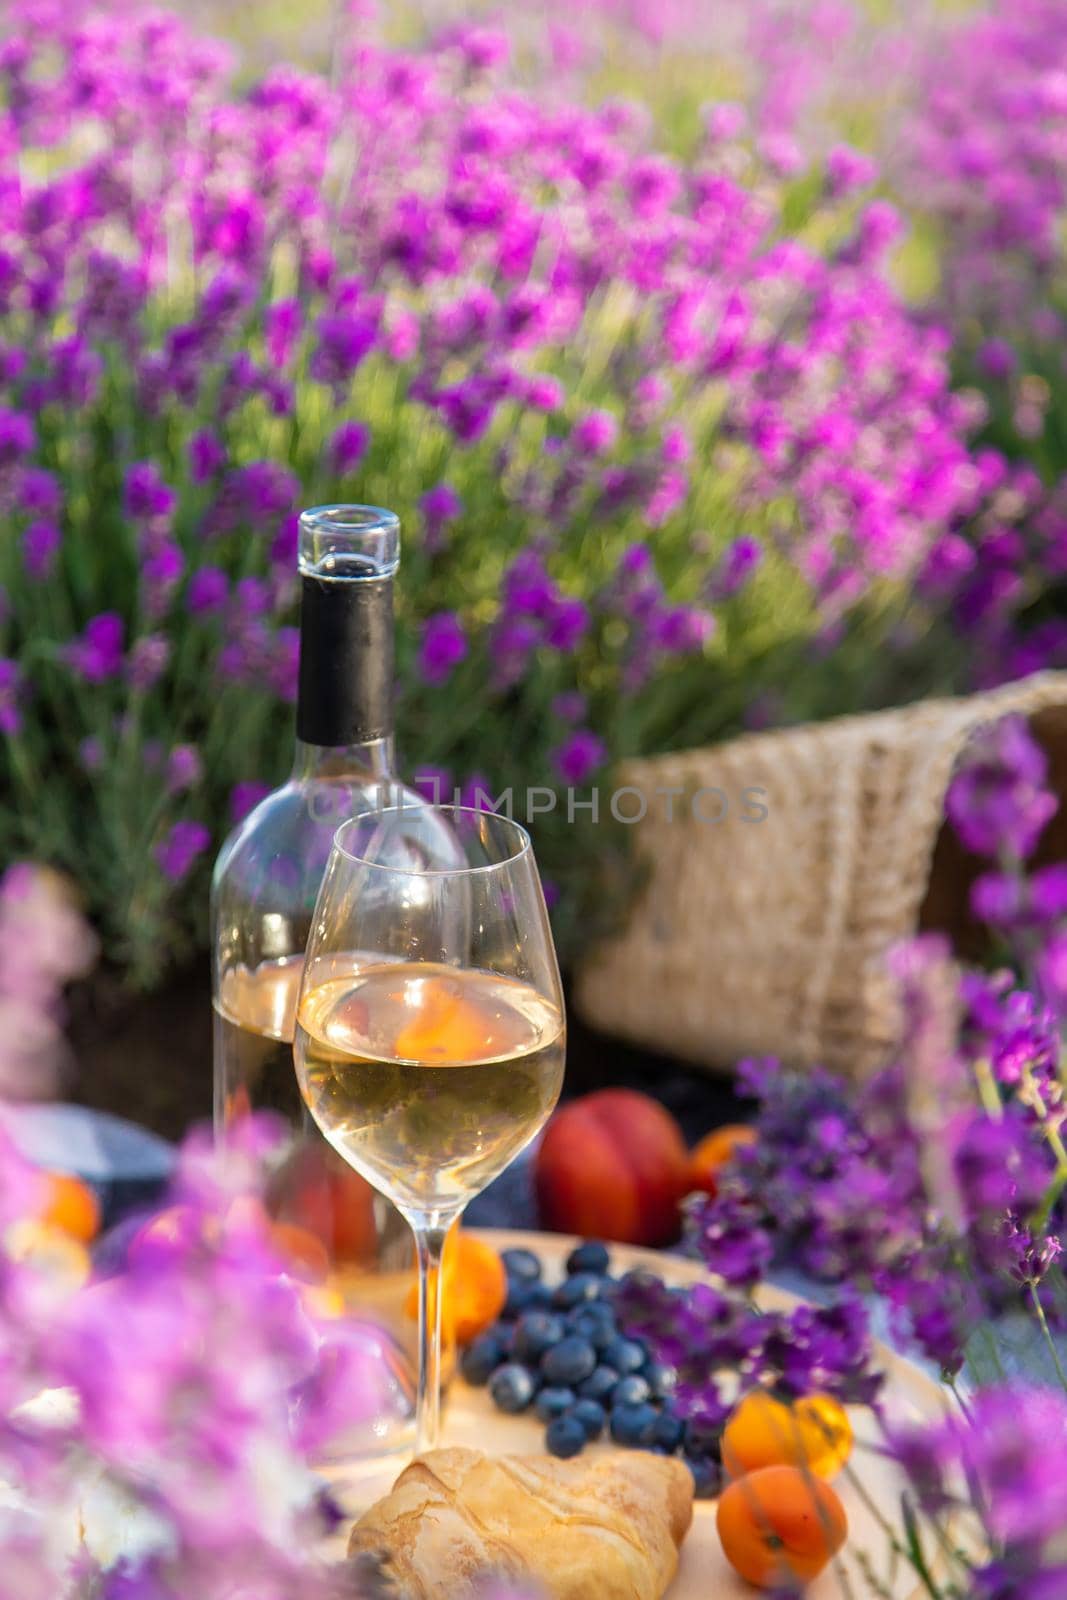 The girl is resting in a lavender field, drinking wine. Selective focus. by Anuta23